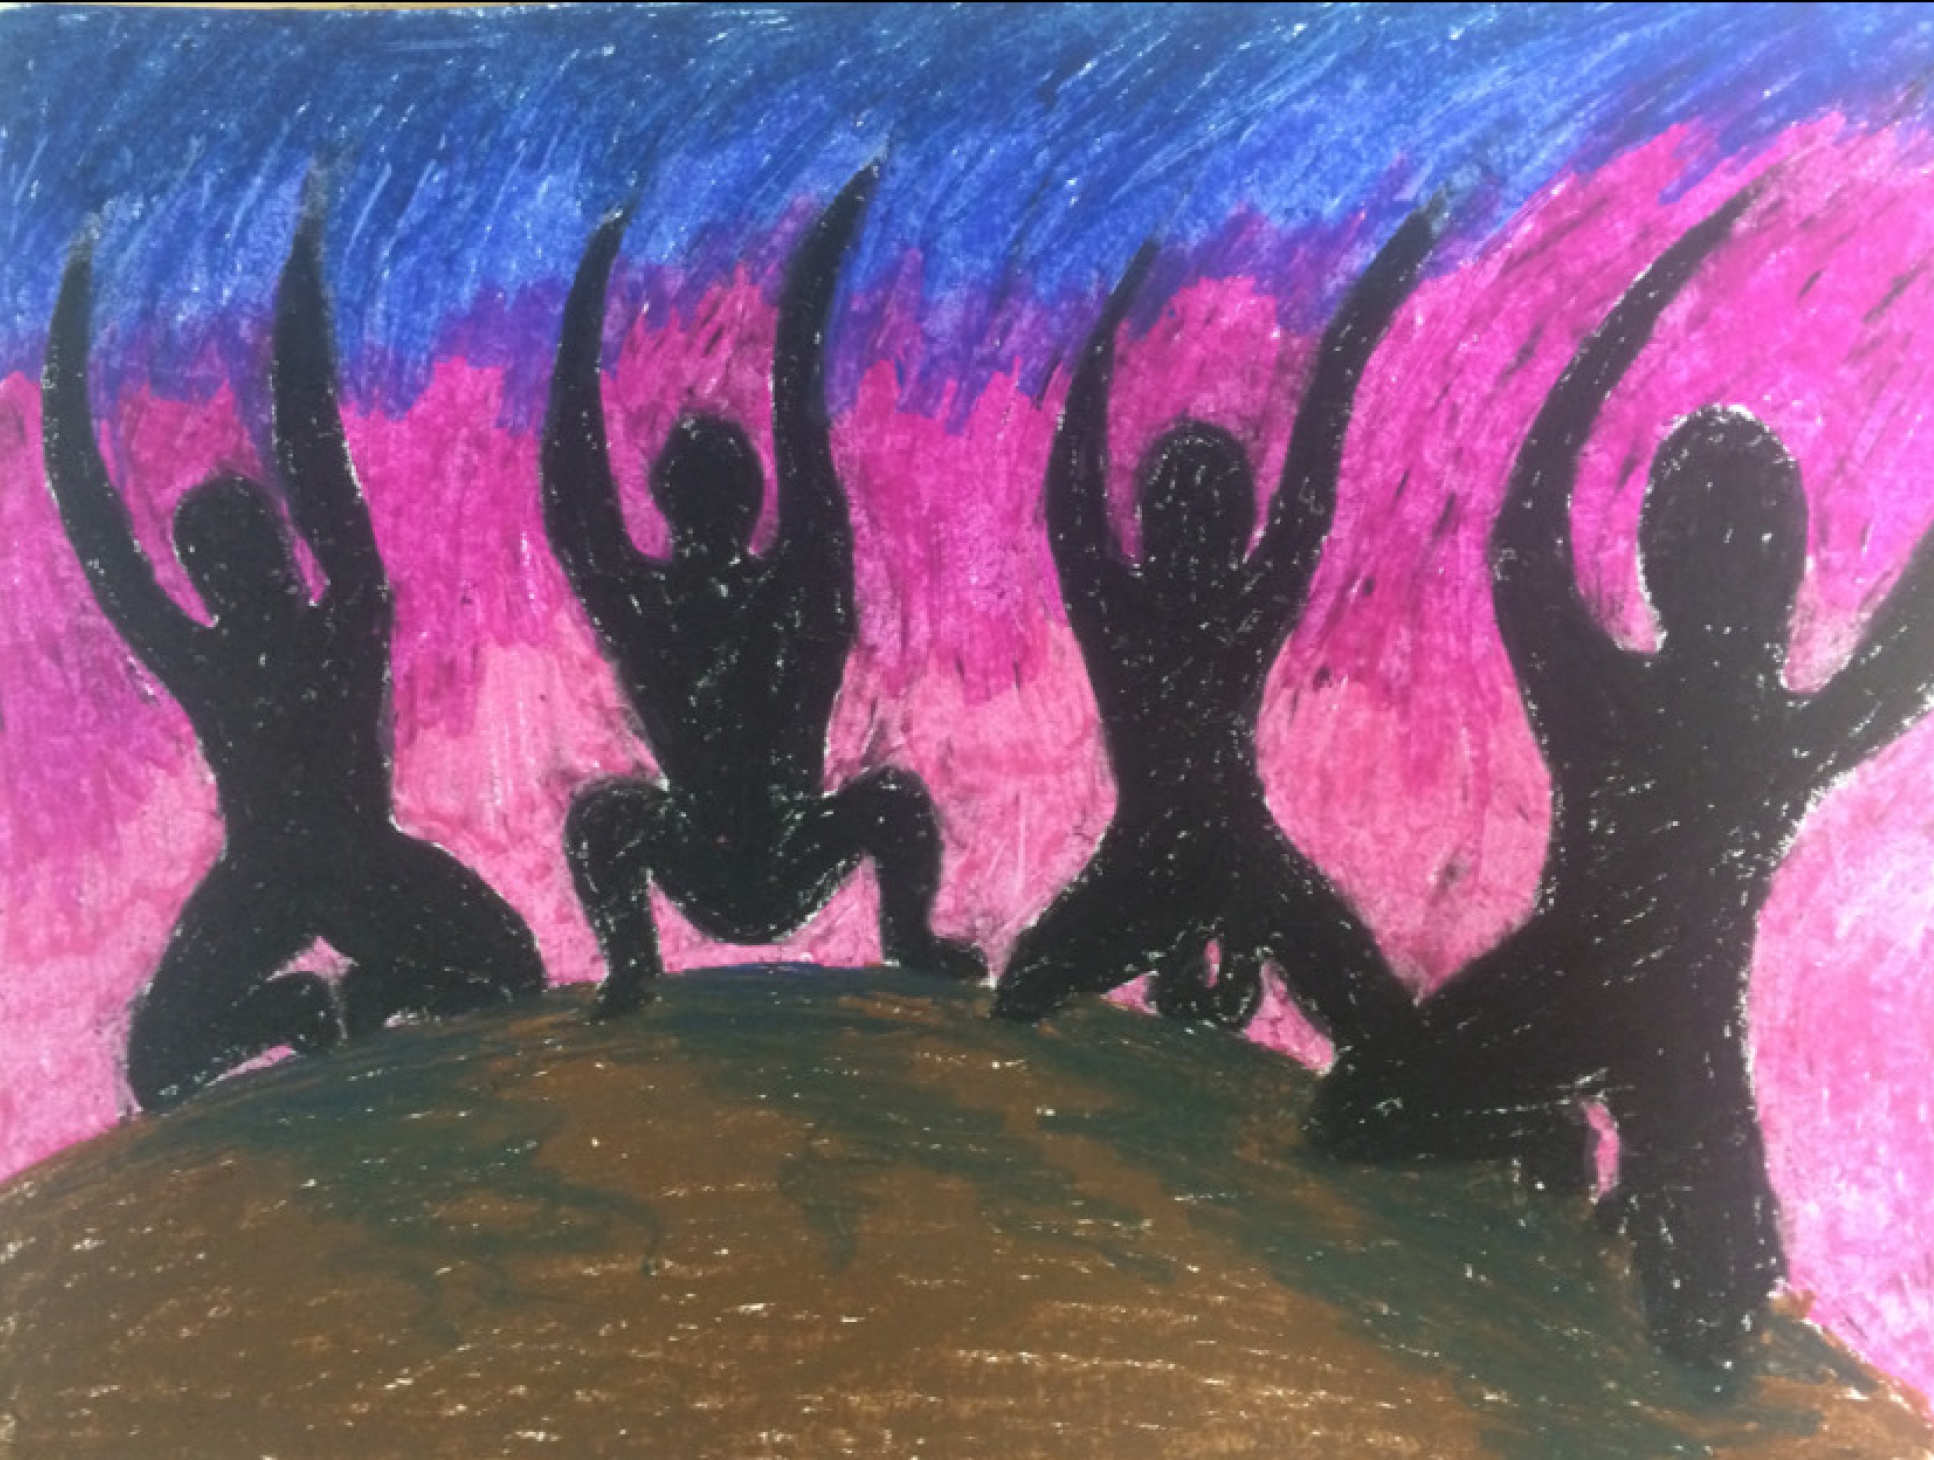 An illustration from one of study participants showing four kneeling shadows on a mound of earth waving their arms against a colourful background. 